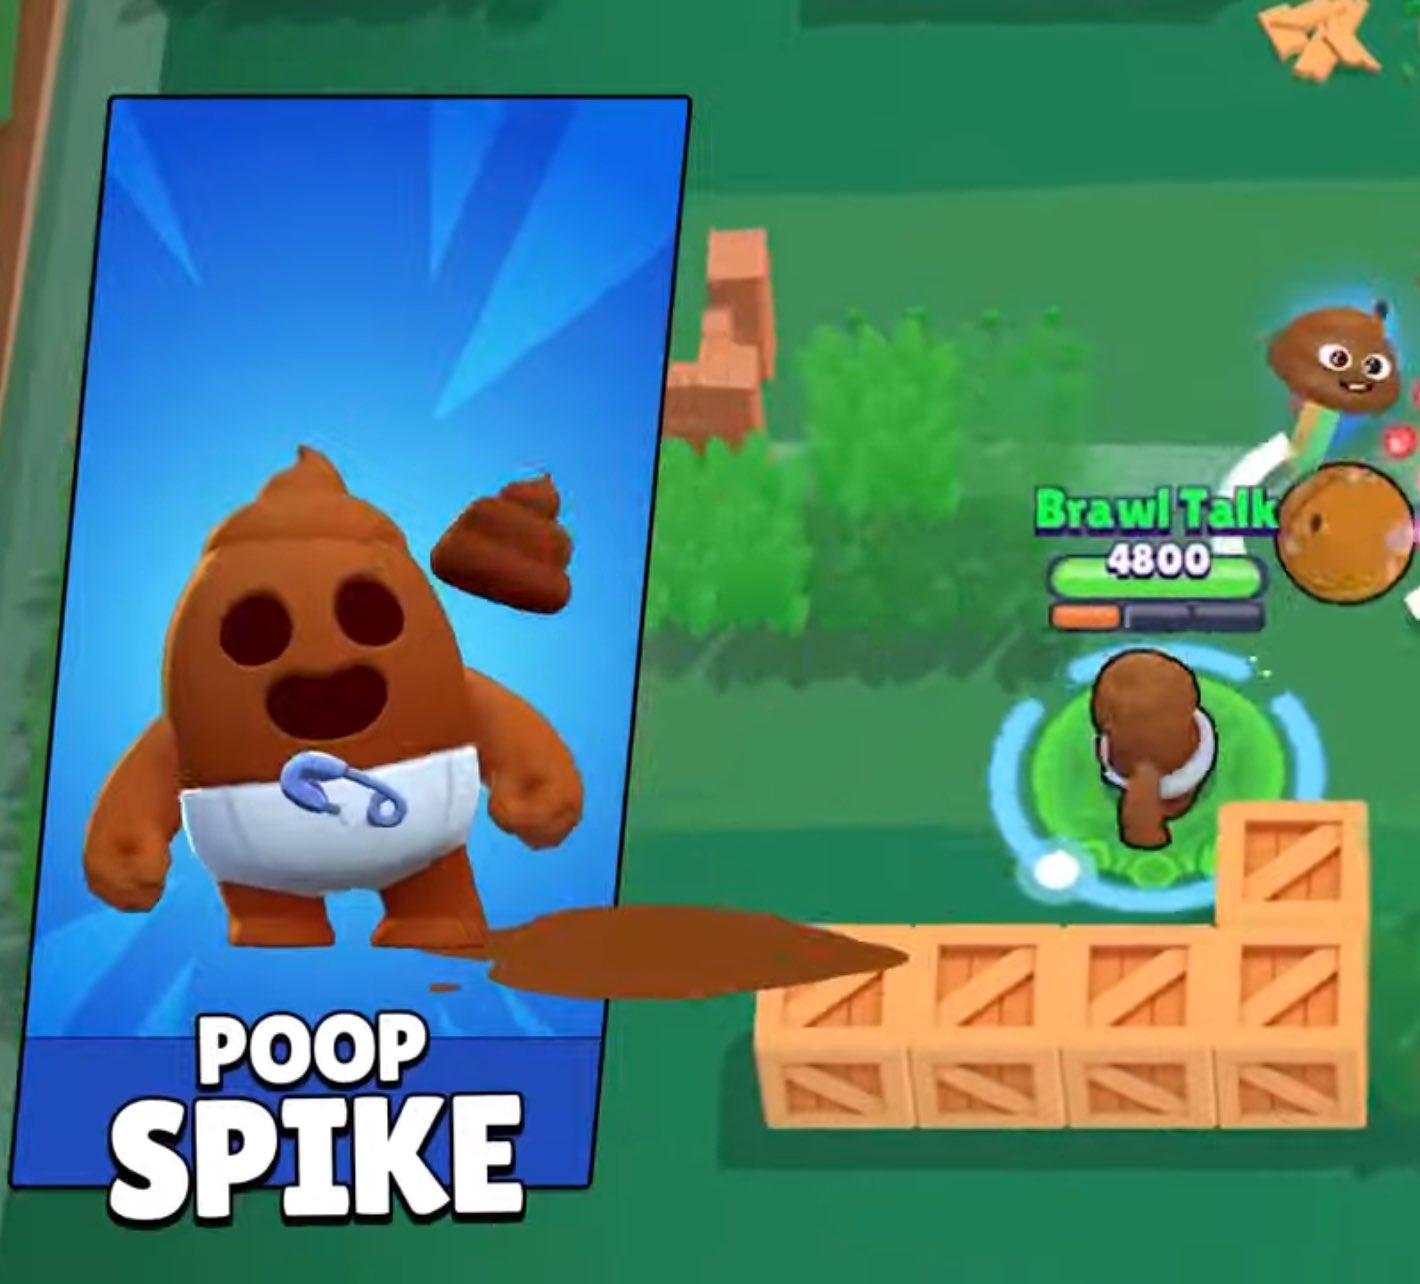 Lana☁️ on X: POOP SPIKE 💩💩 IM GONNA SH*T ALL OVER THE ENEMIES